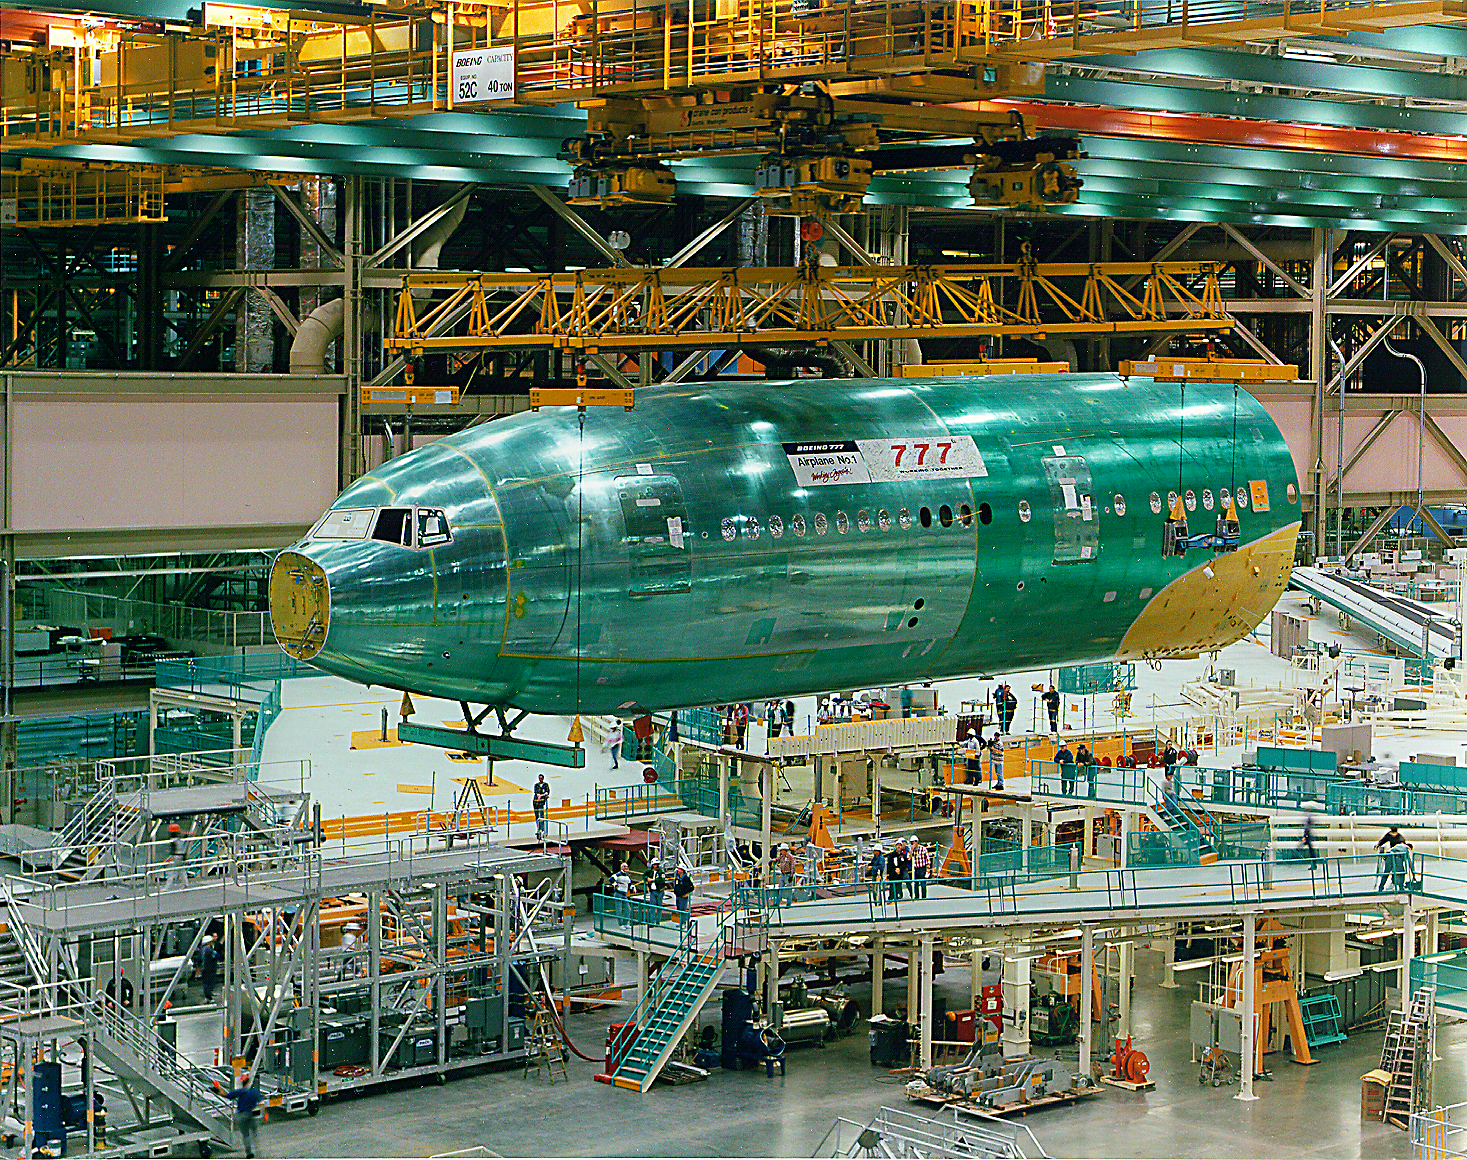 interior of aircraft manufacturing plant